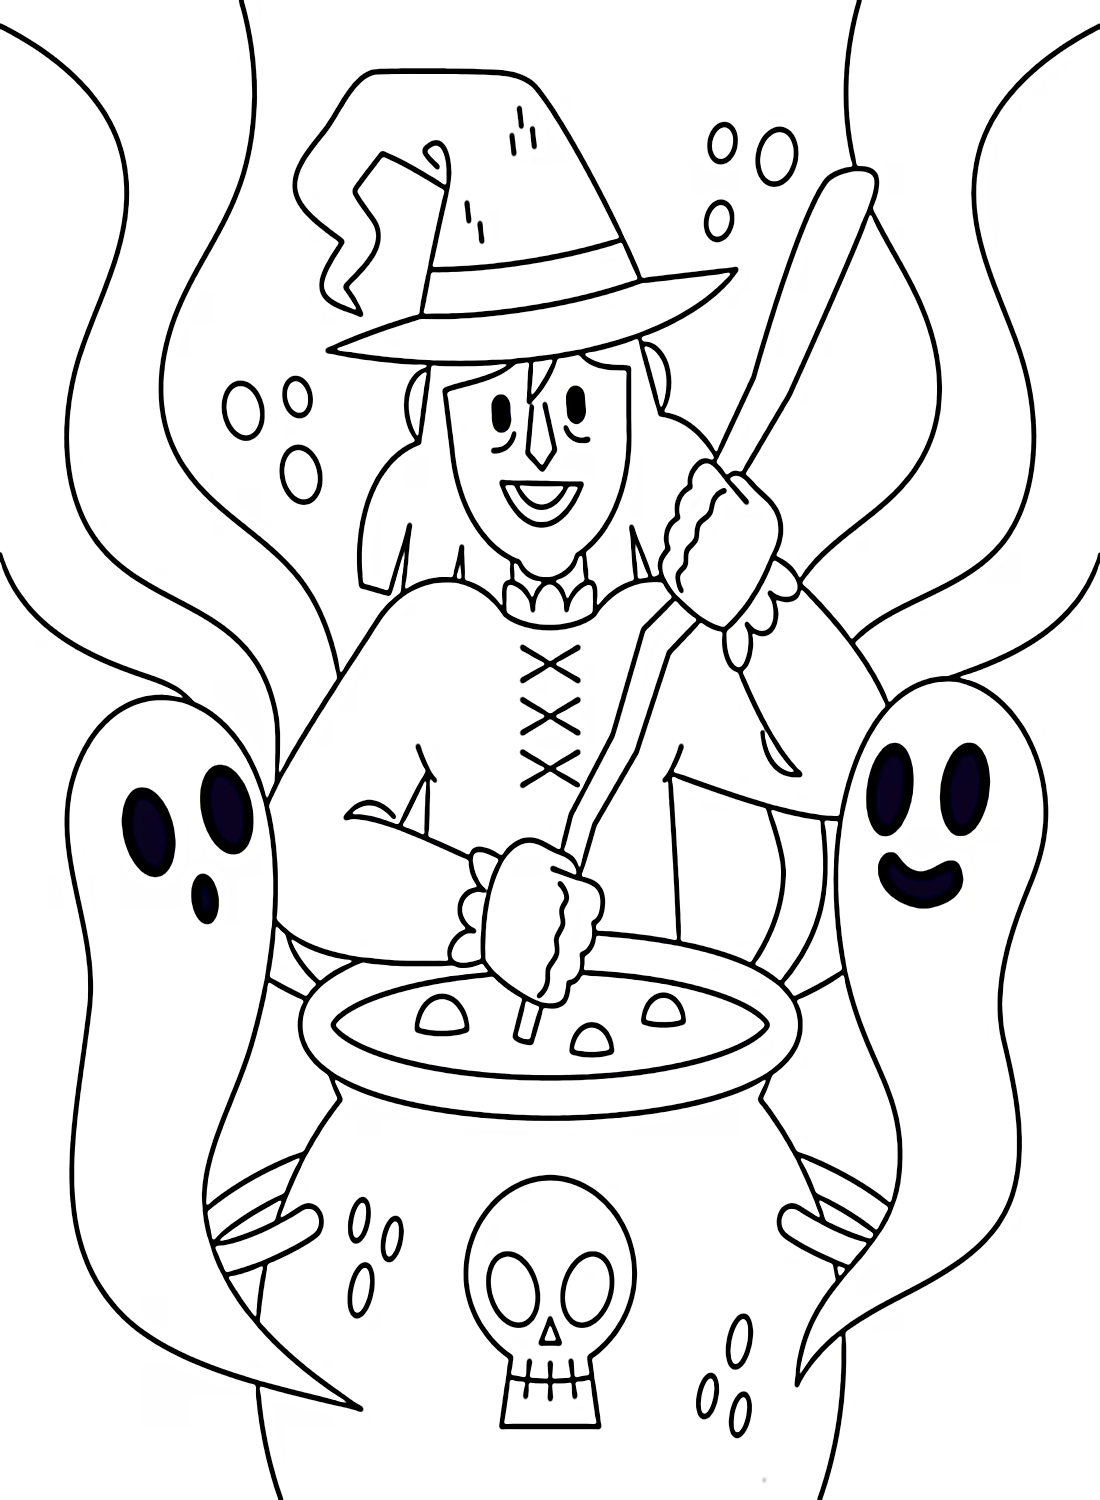 Happy Halloween Color - Free Printable Coloring Pages